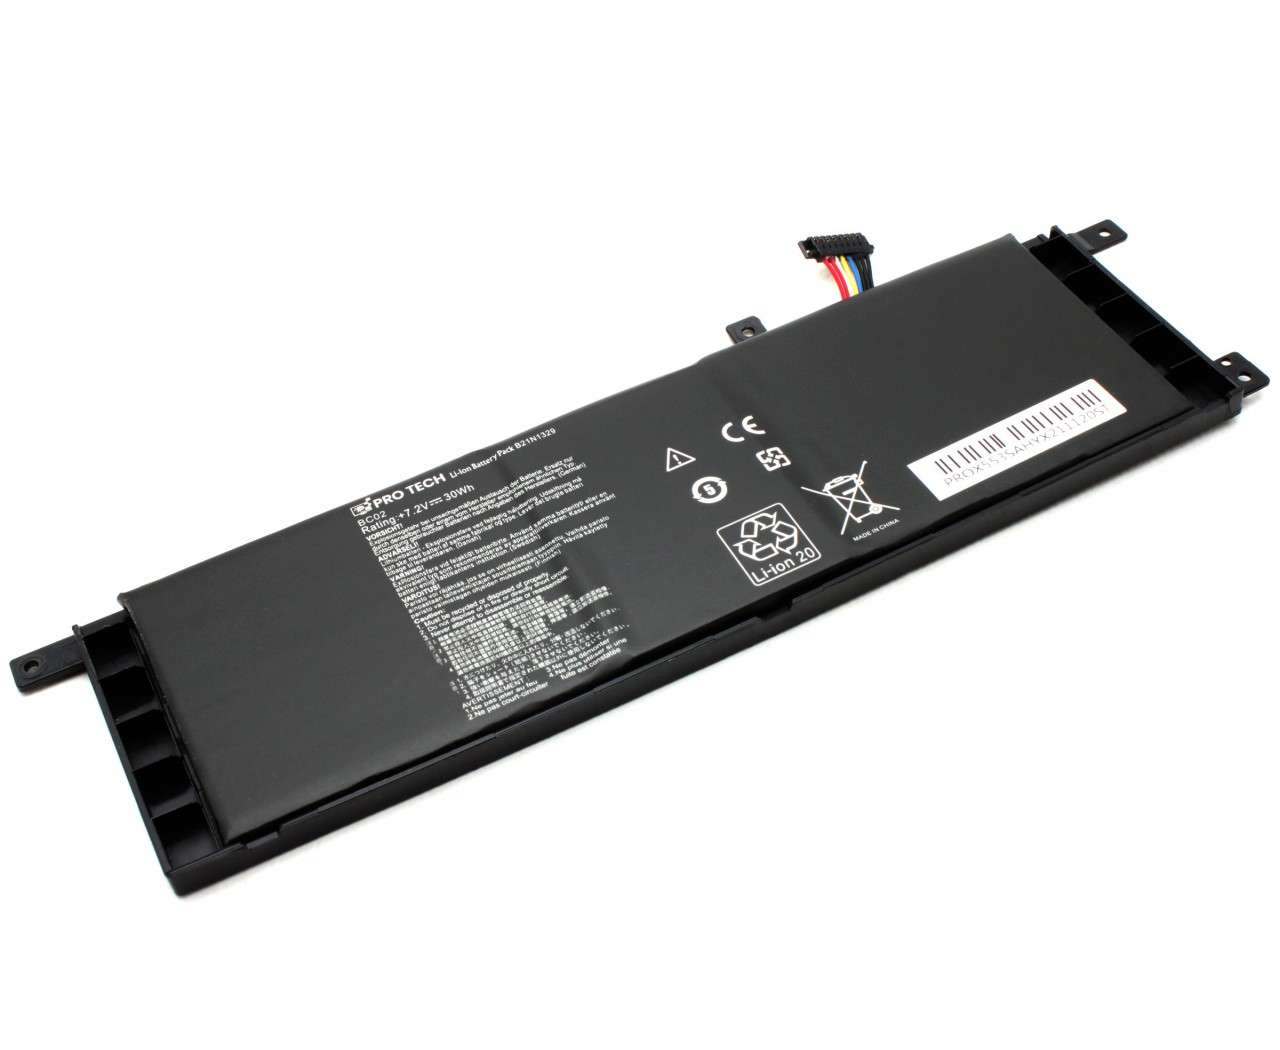 Baterie Asus D553MA Protech High Quality Replacement